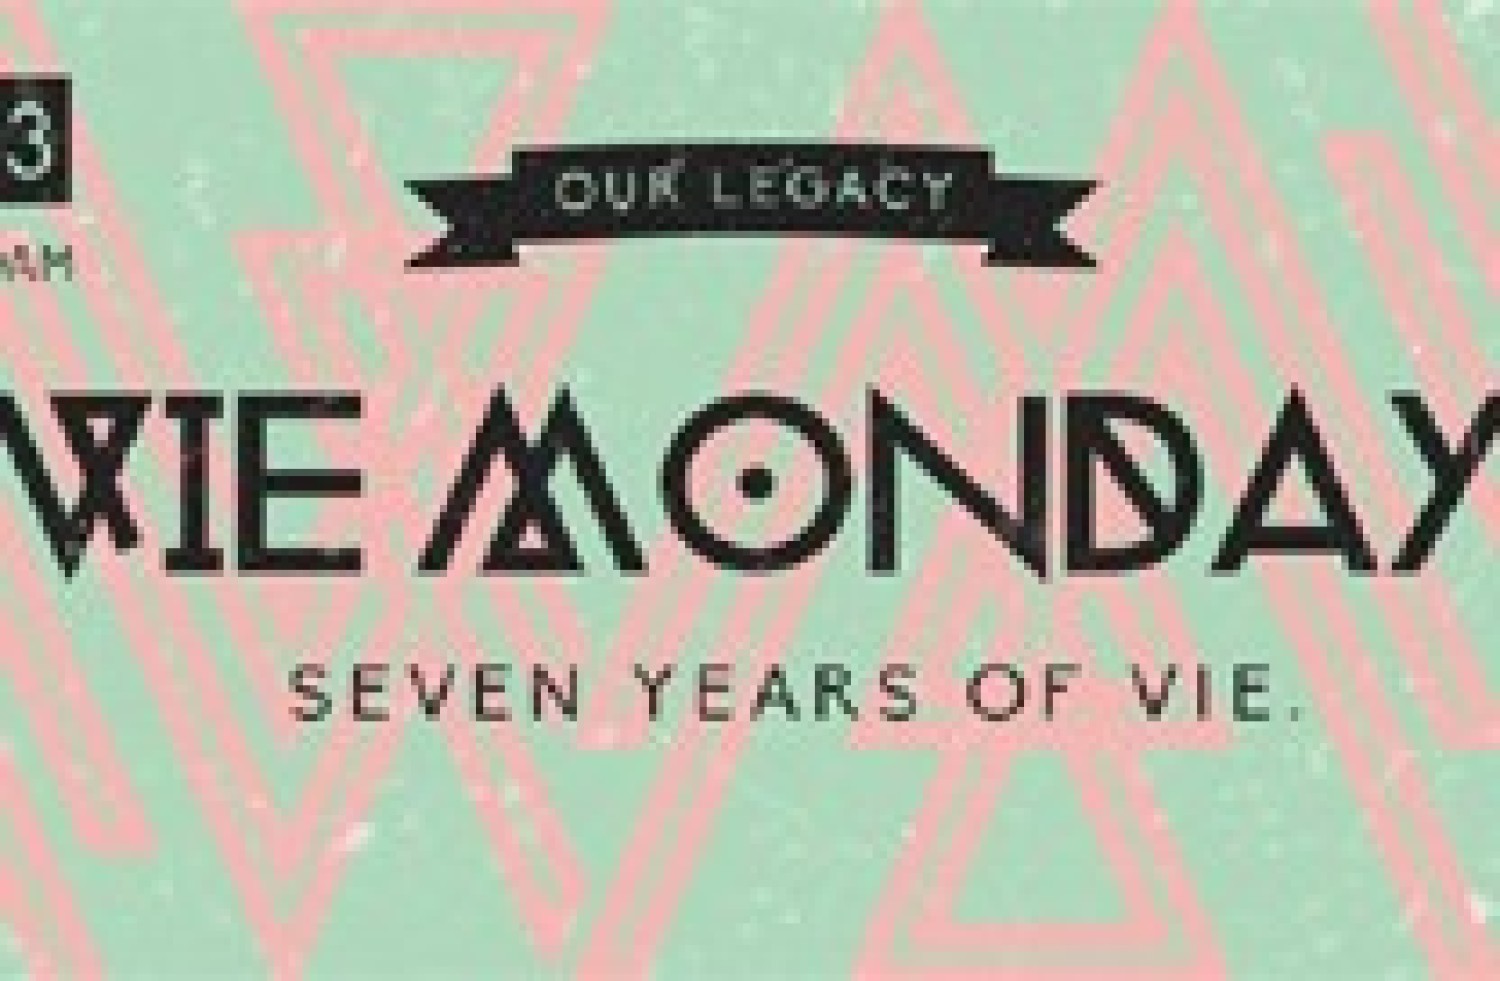 Party nieuws: Vie Monday - 7 year anniversary with Our Legacy